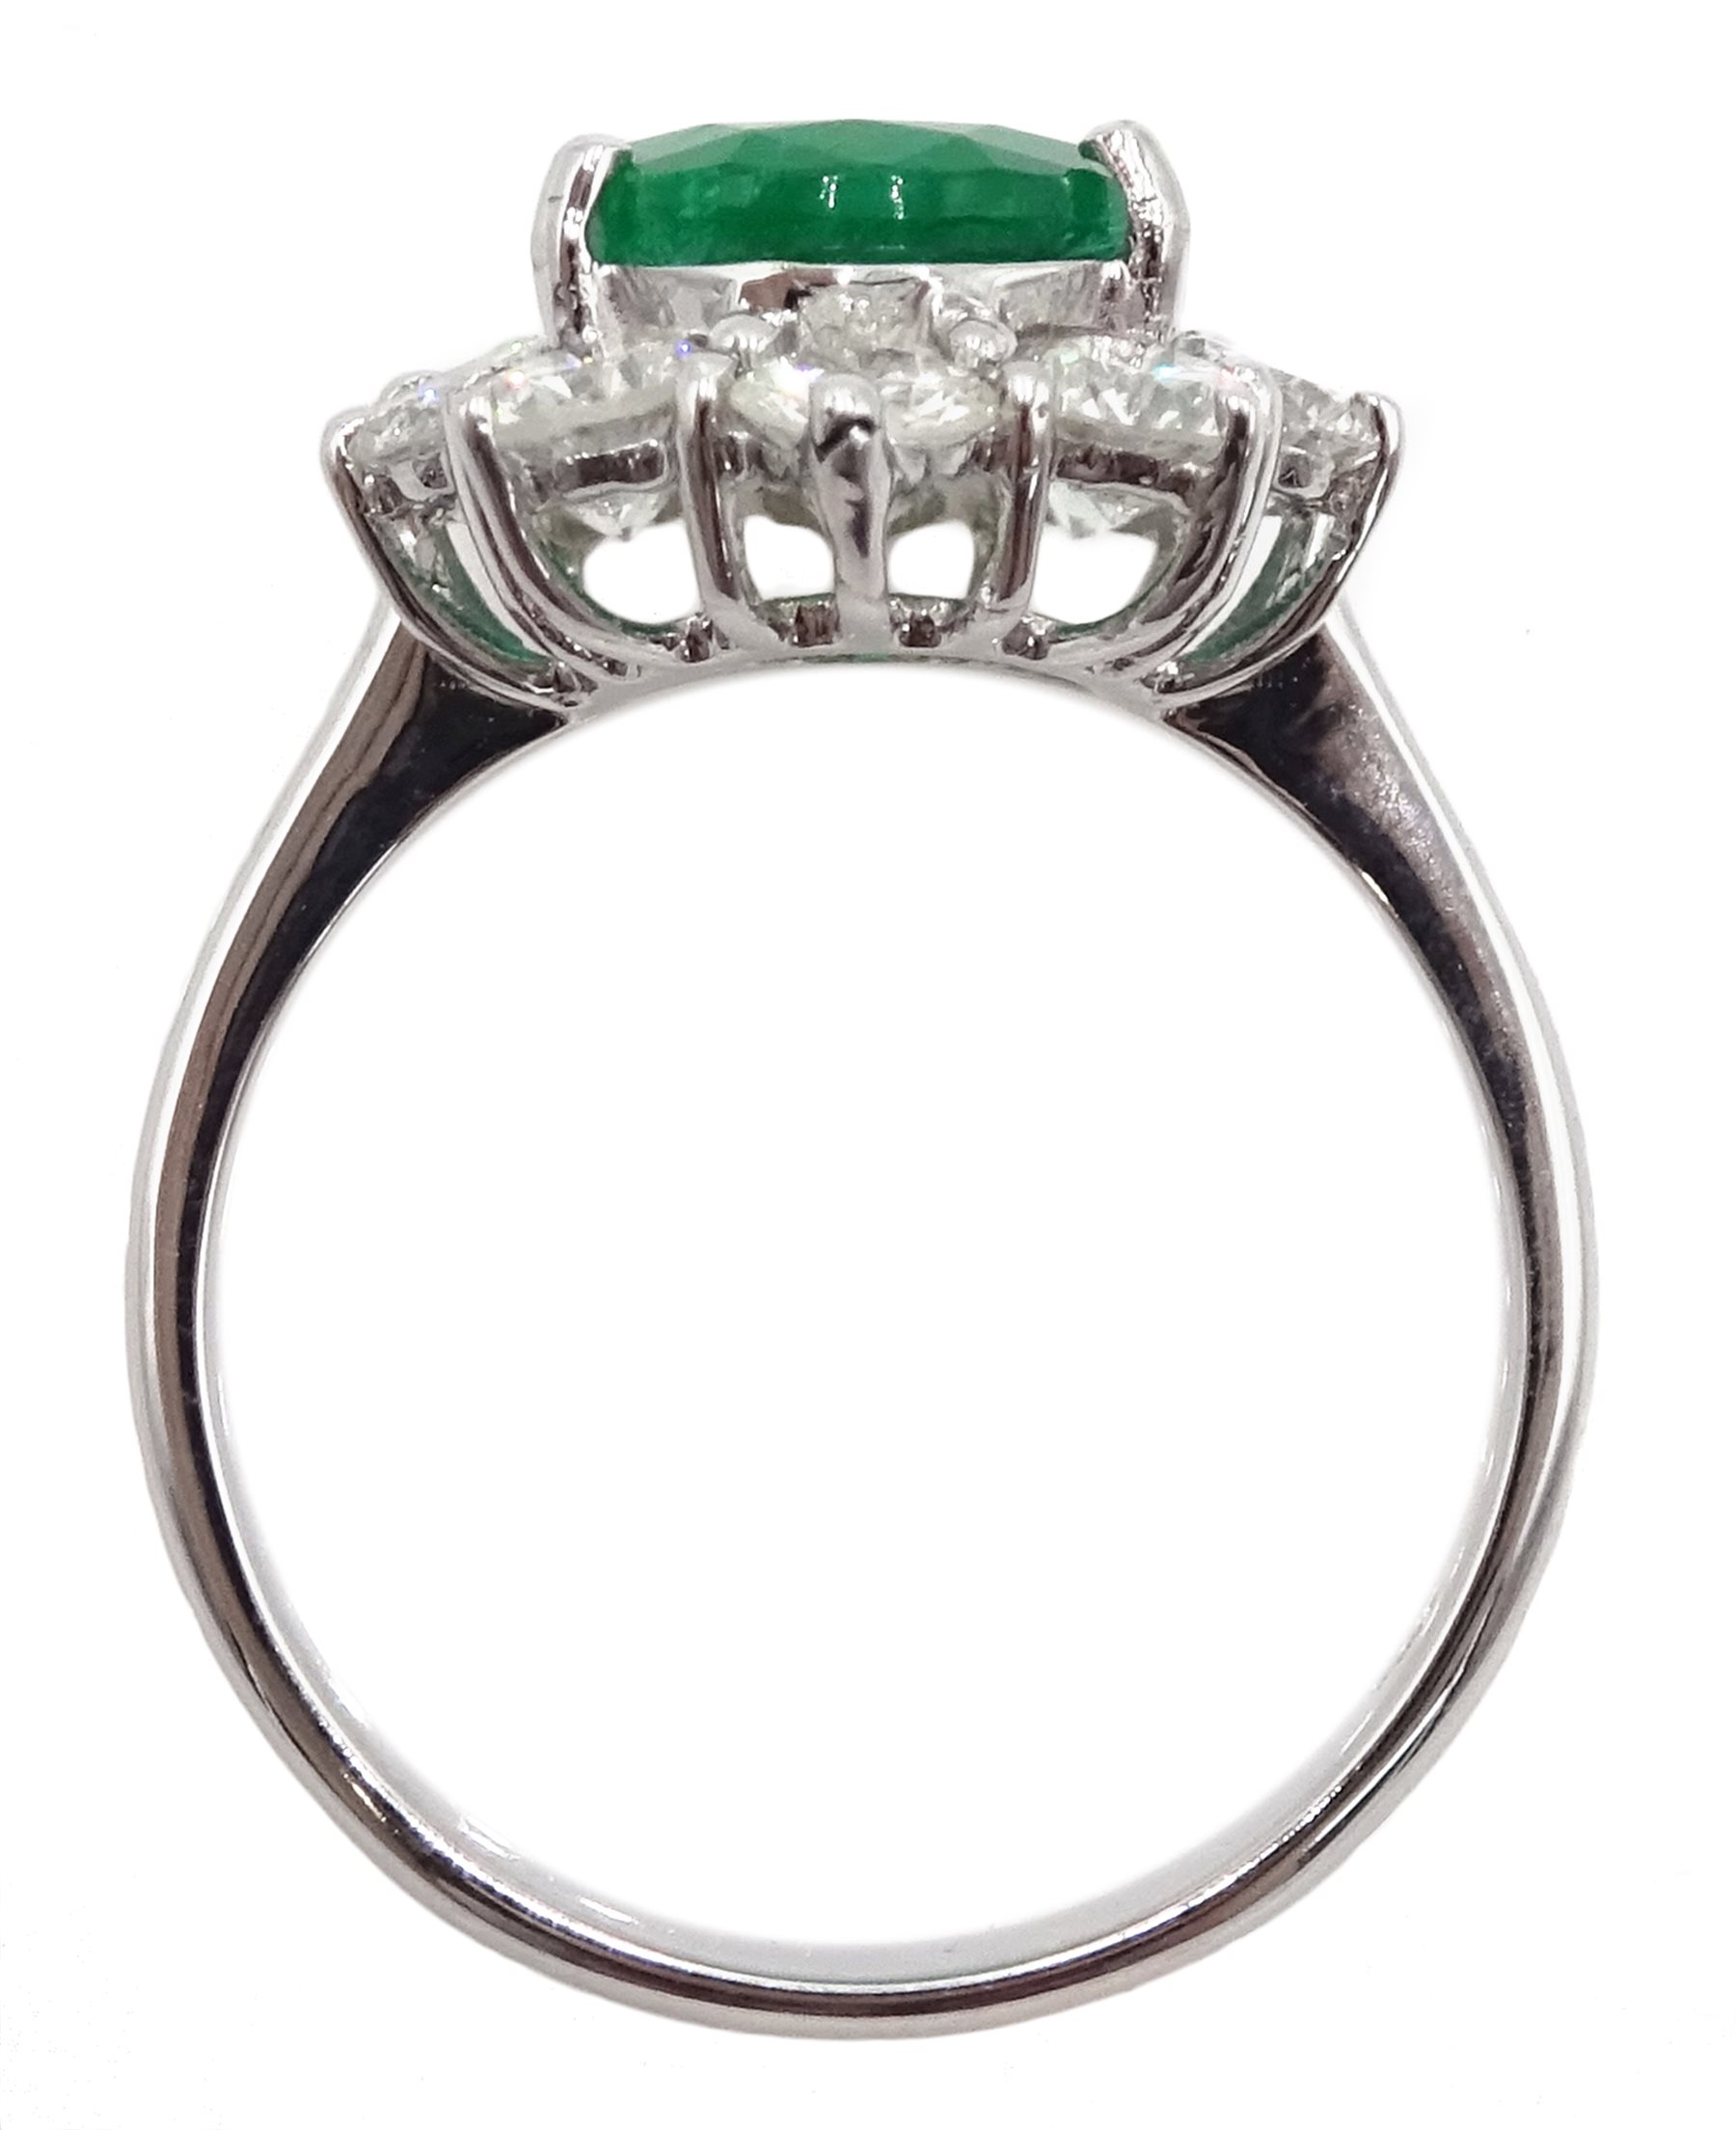 White gold oval emerald and round brilliant cut diamond ring, stamped 750, emerald approx 2.80 carat - Image 5 of 9